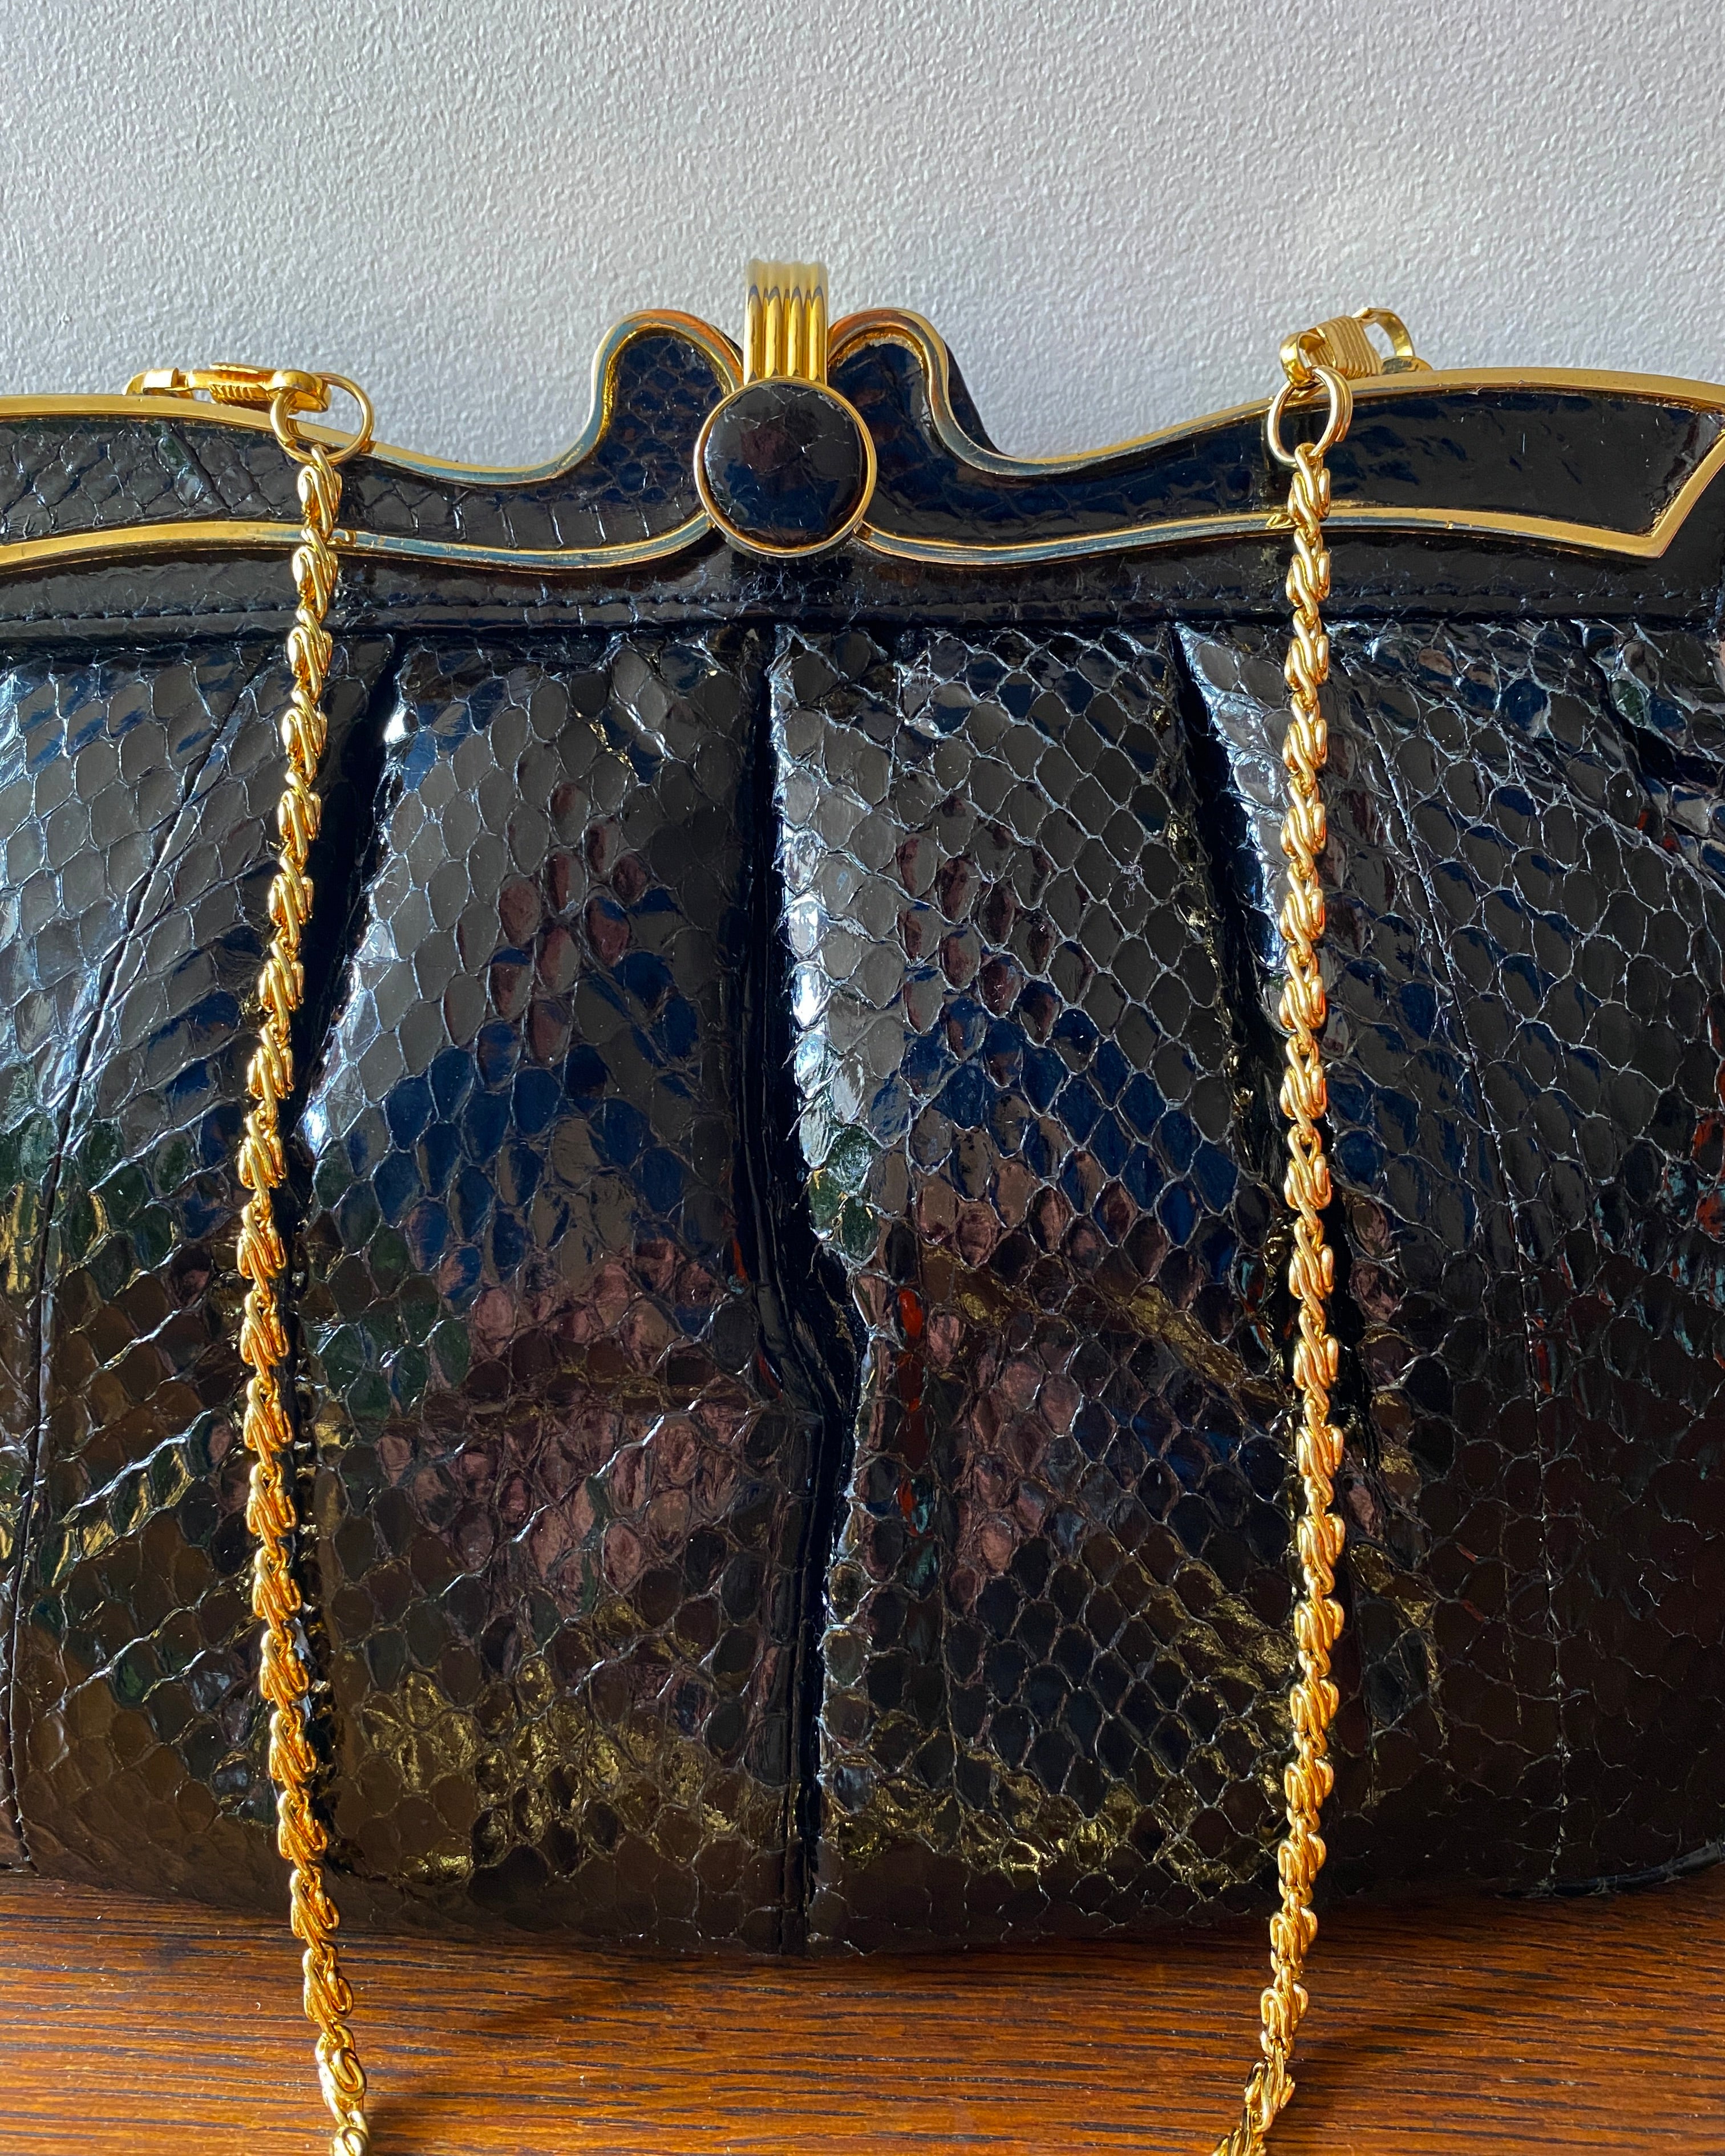 Vintage Black Snake Skin Farnell Paris Bag with Gold Chain